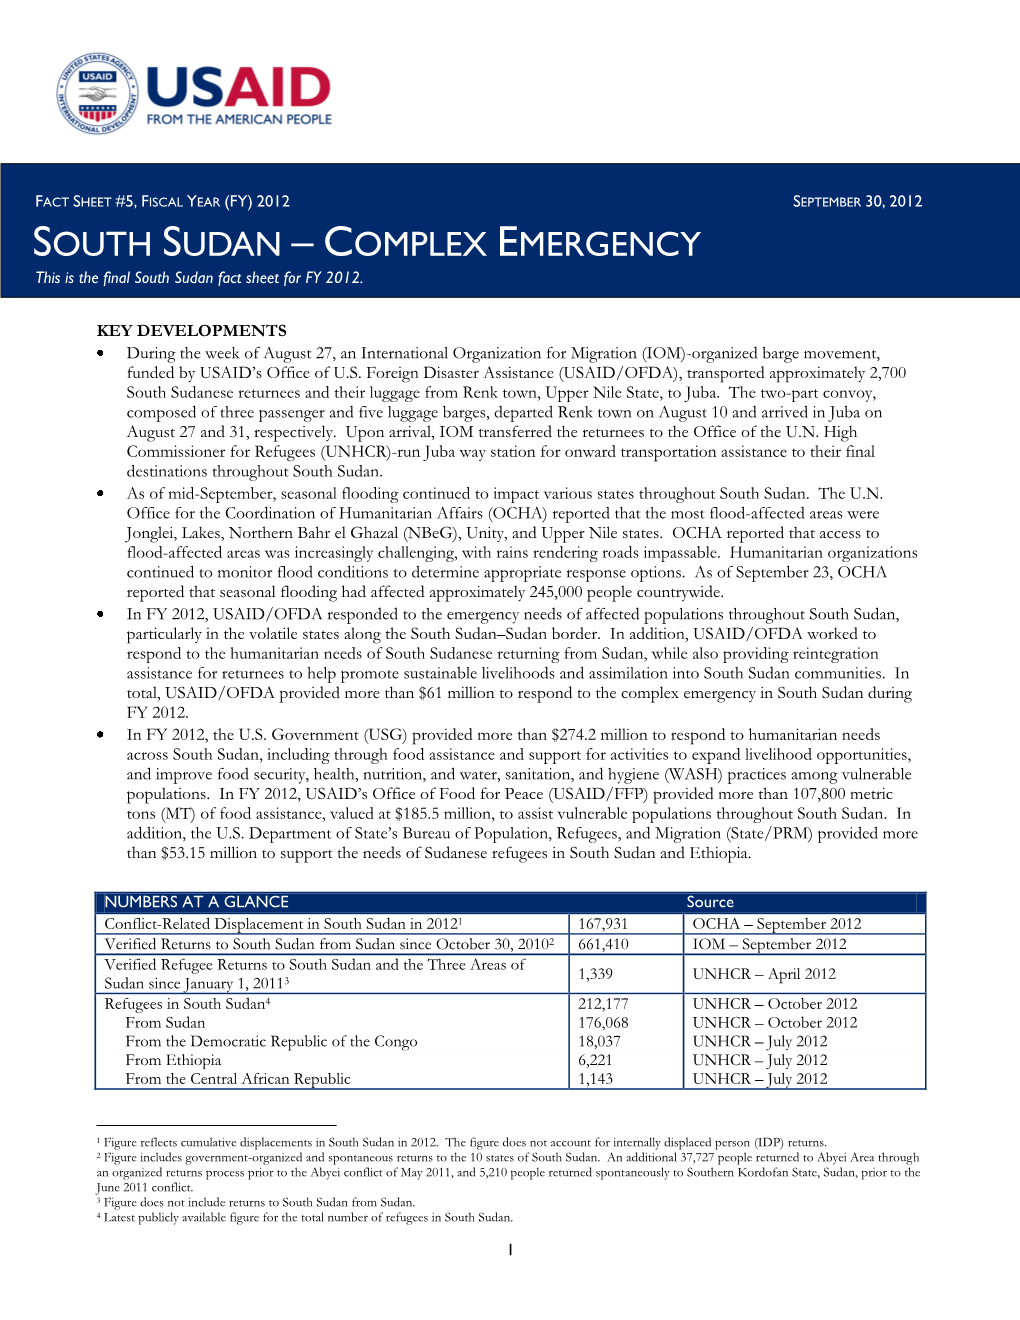 SOUTH SUDAN – COMPLEX EMERGENCY This Is the Final South Sudan Fact Sheet for FY 2012